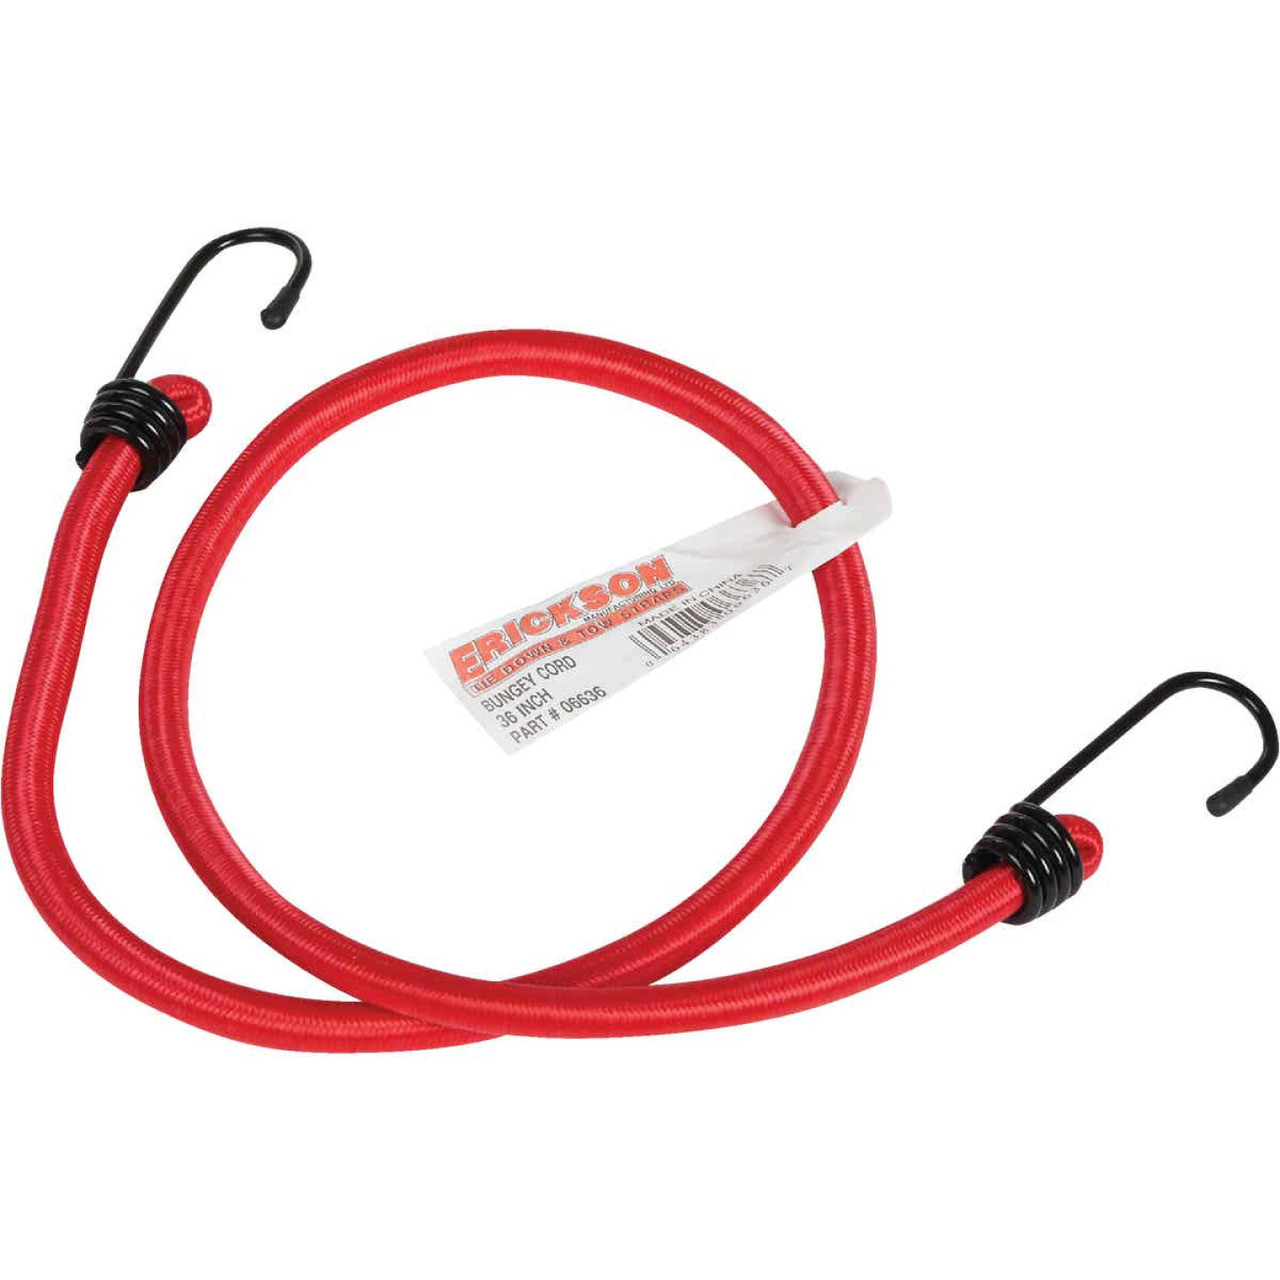 Erickson 1/4 In. x 36 In. Bungee Cord, Assorted Colors